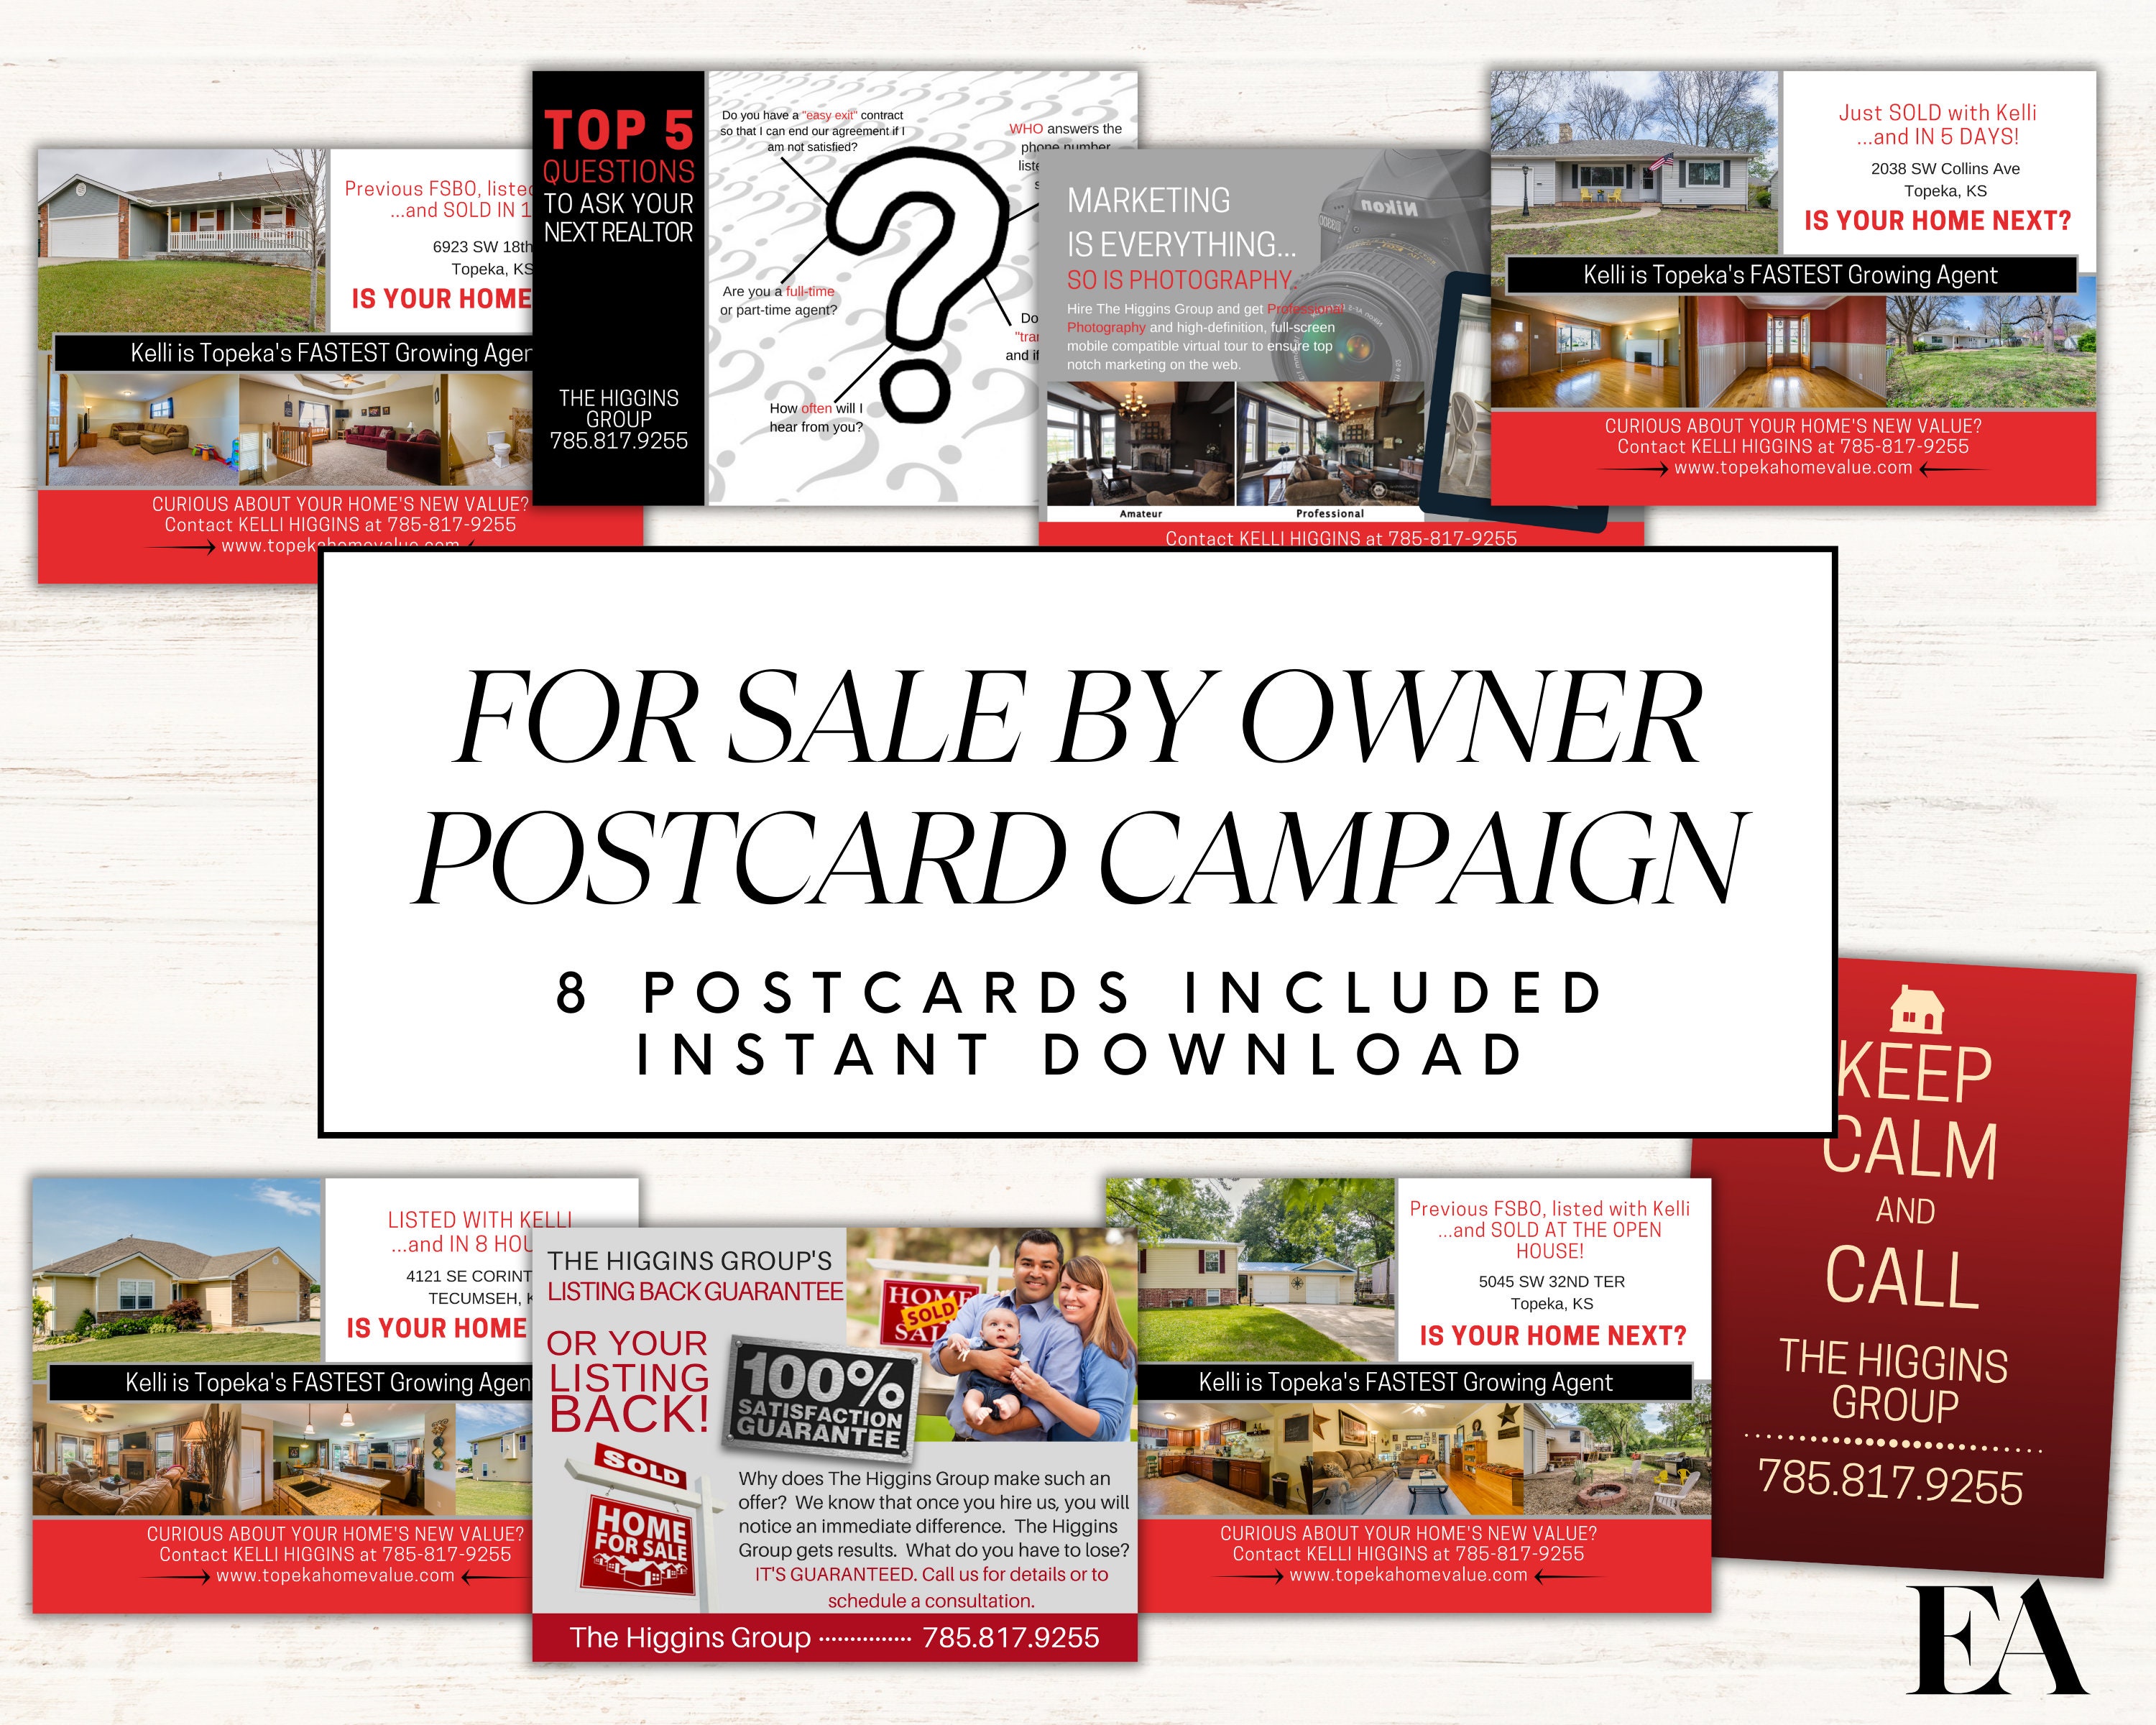 Real Estate FSBO Postcard for Sale by Owner Guide Real Estate photo pic picture